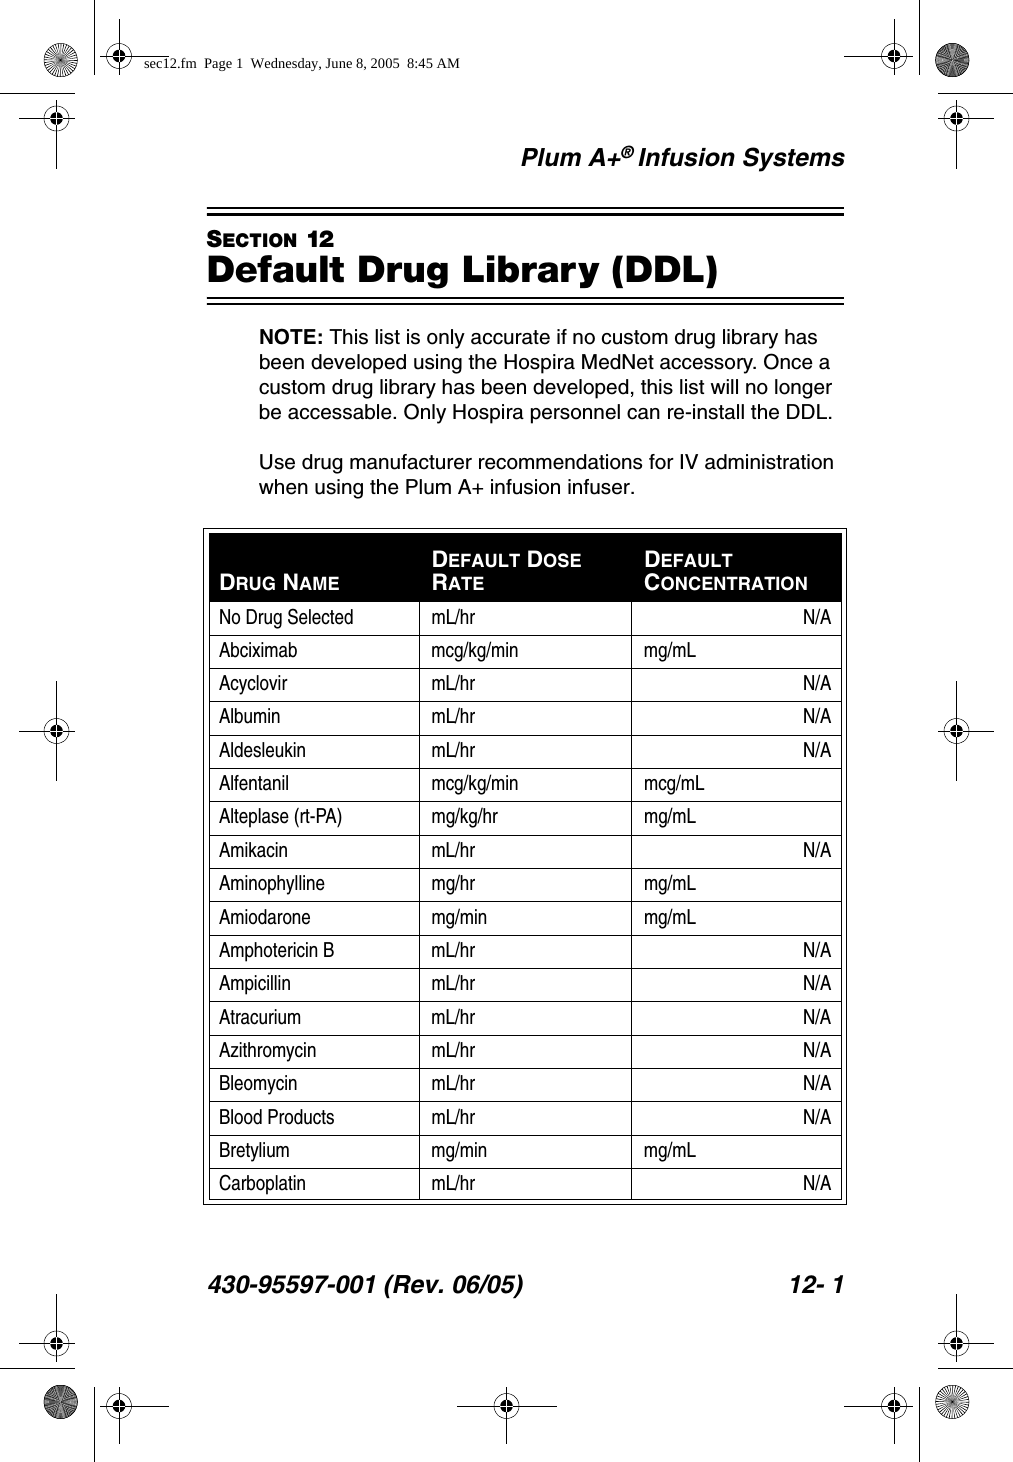 Plum A+® Infusion Systems430-95597-001 (Rev. 06/05) 12- 1SECTION 12Default Drug Library (DDL)NOTE: This list is only accurate if no custom drug library has been developed using the Hospira MedNet accessory. Once a custom drug library has been developed, this list will no longer be accessable. Only Hospira personnel can re-install the DDL.Use drug manufacturer recommendations for IV administration when using the Plum A+ infusion infuser.DRUG NAMEDEFAULT DOSE RATEDEFAULT CONCENTRATIONNo Drug Selected mL/hr N/AAbciximab mcg/kg/min mg/mLAcyclovir mL/hr N/AAlbumin mL/hr N/AAldesleukin mL/hr N/AAlfentanil mcg/kg/min mcg/mLAlteplase (rt-PA) mg/kg/hr mg/mLAmikacin mL/hr N/AAminophylline mg/hr mg/mLAmiodarone mg/min mg/mLAmphotericin B mL/hr N/AAmpicillin mL/hr N/AAtracurium mL/hr N/AAzithromycin mL/hr N/ABleomycin mL/hr N/ABlood Products mL/hr N/ABretylium mg/min mg/mLCarboplatin mL/hr N/Asec12.fm  Page 1  Wednesday, June 8, 2005  8:45 AM